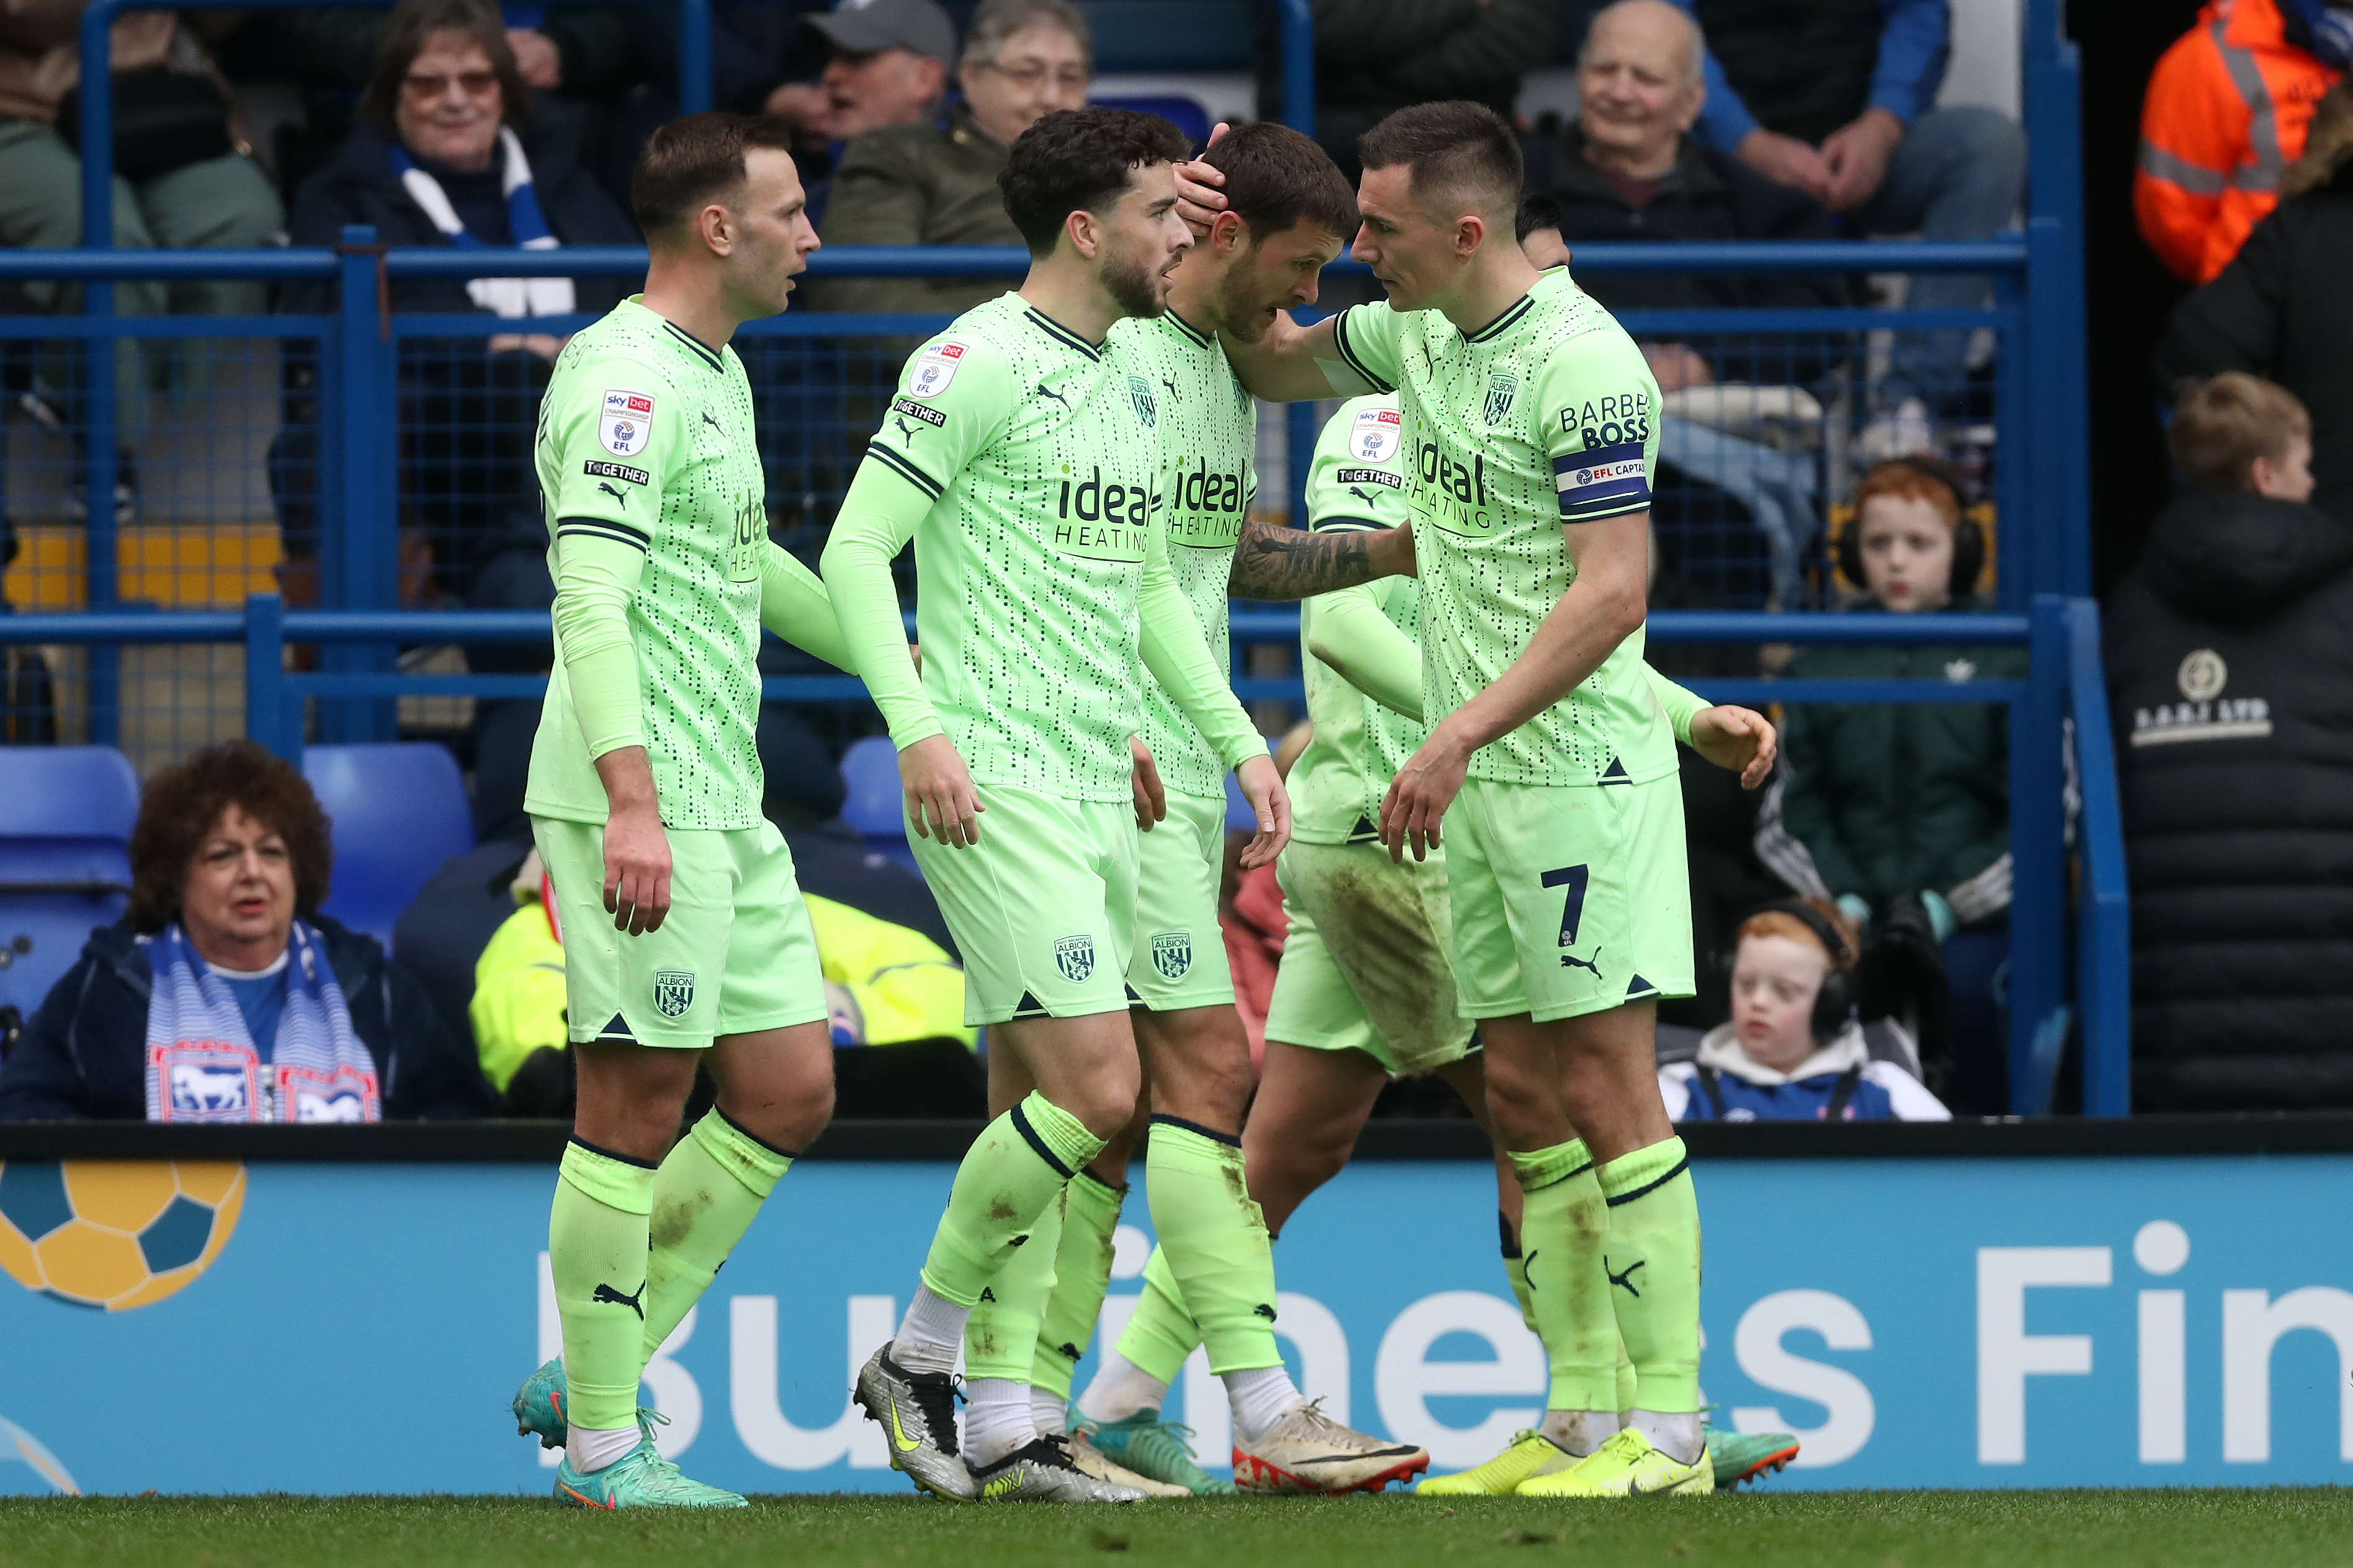 Albion players celebrate with John Swift after his goal at Portman Road against Ipswich while wearing the lime green away kit